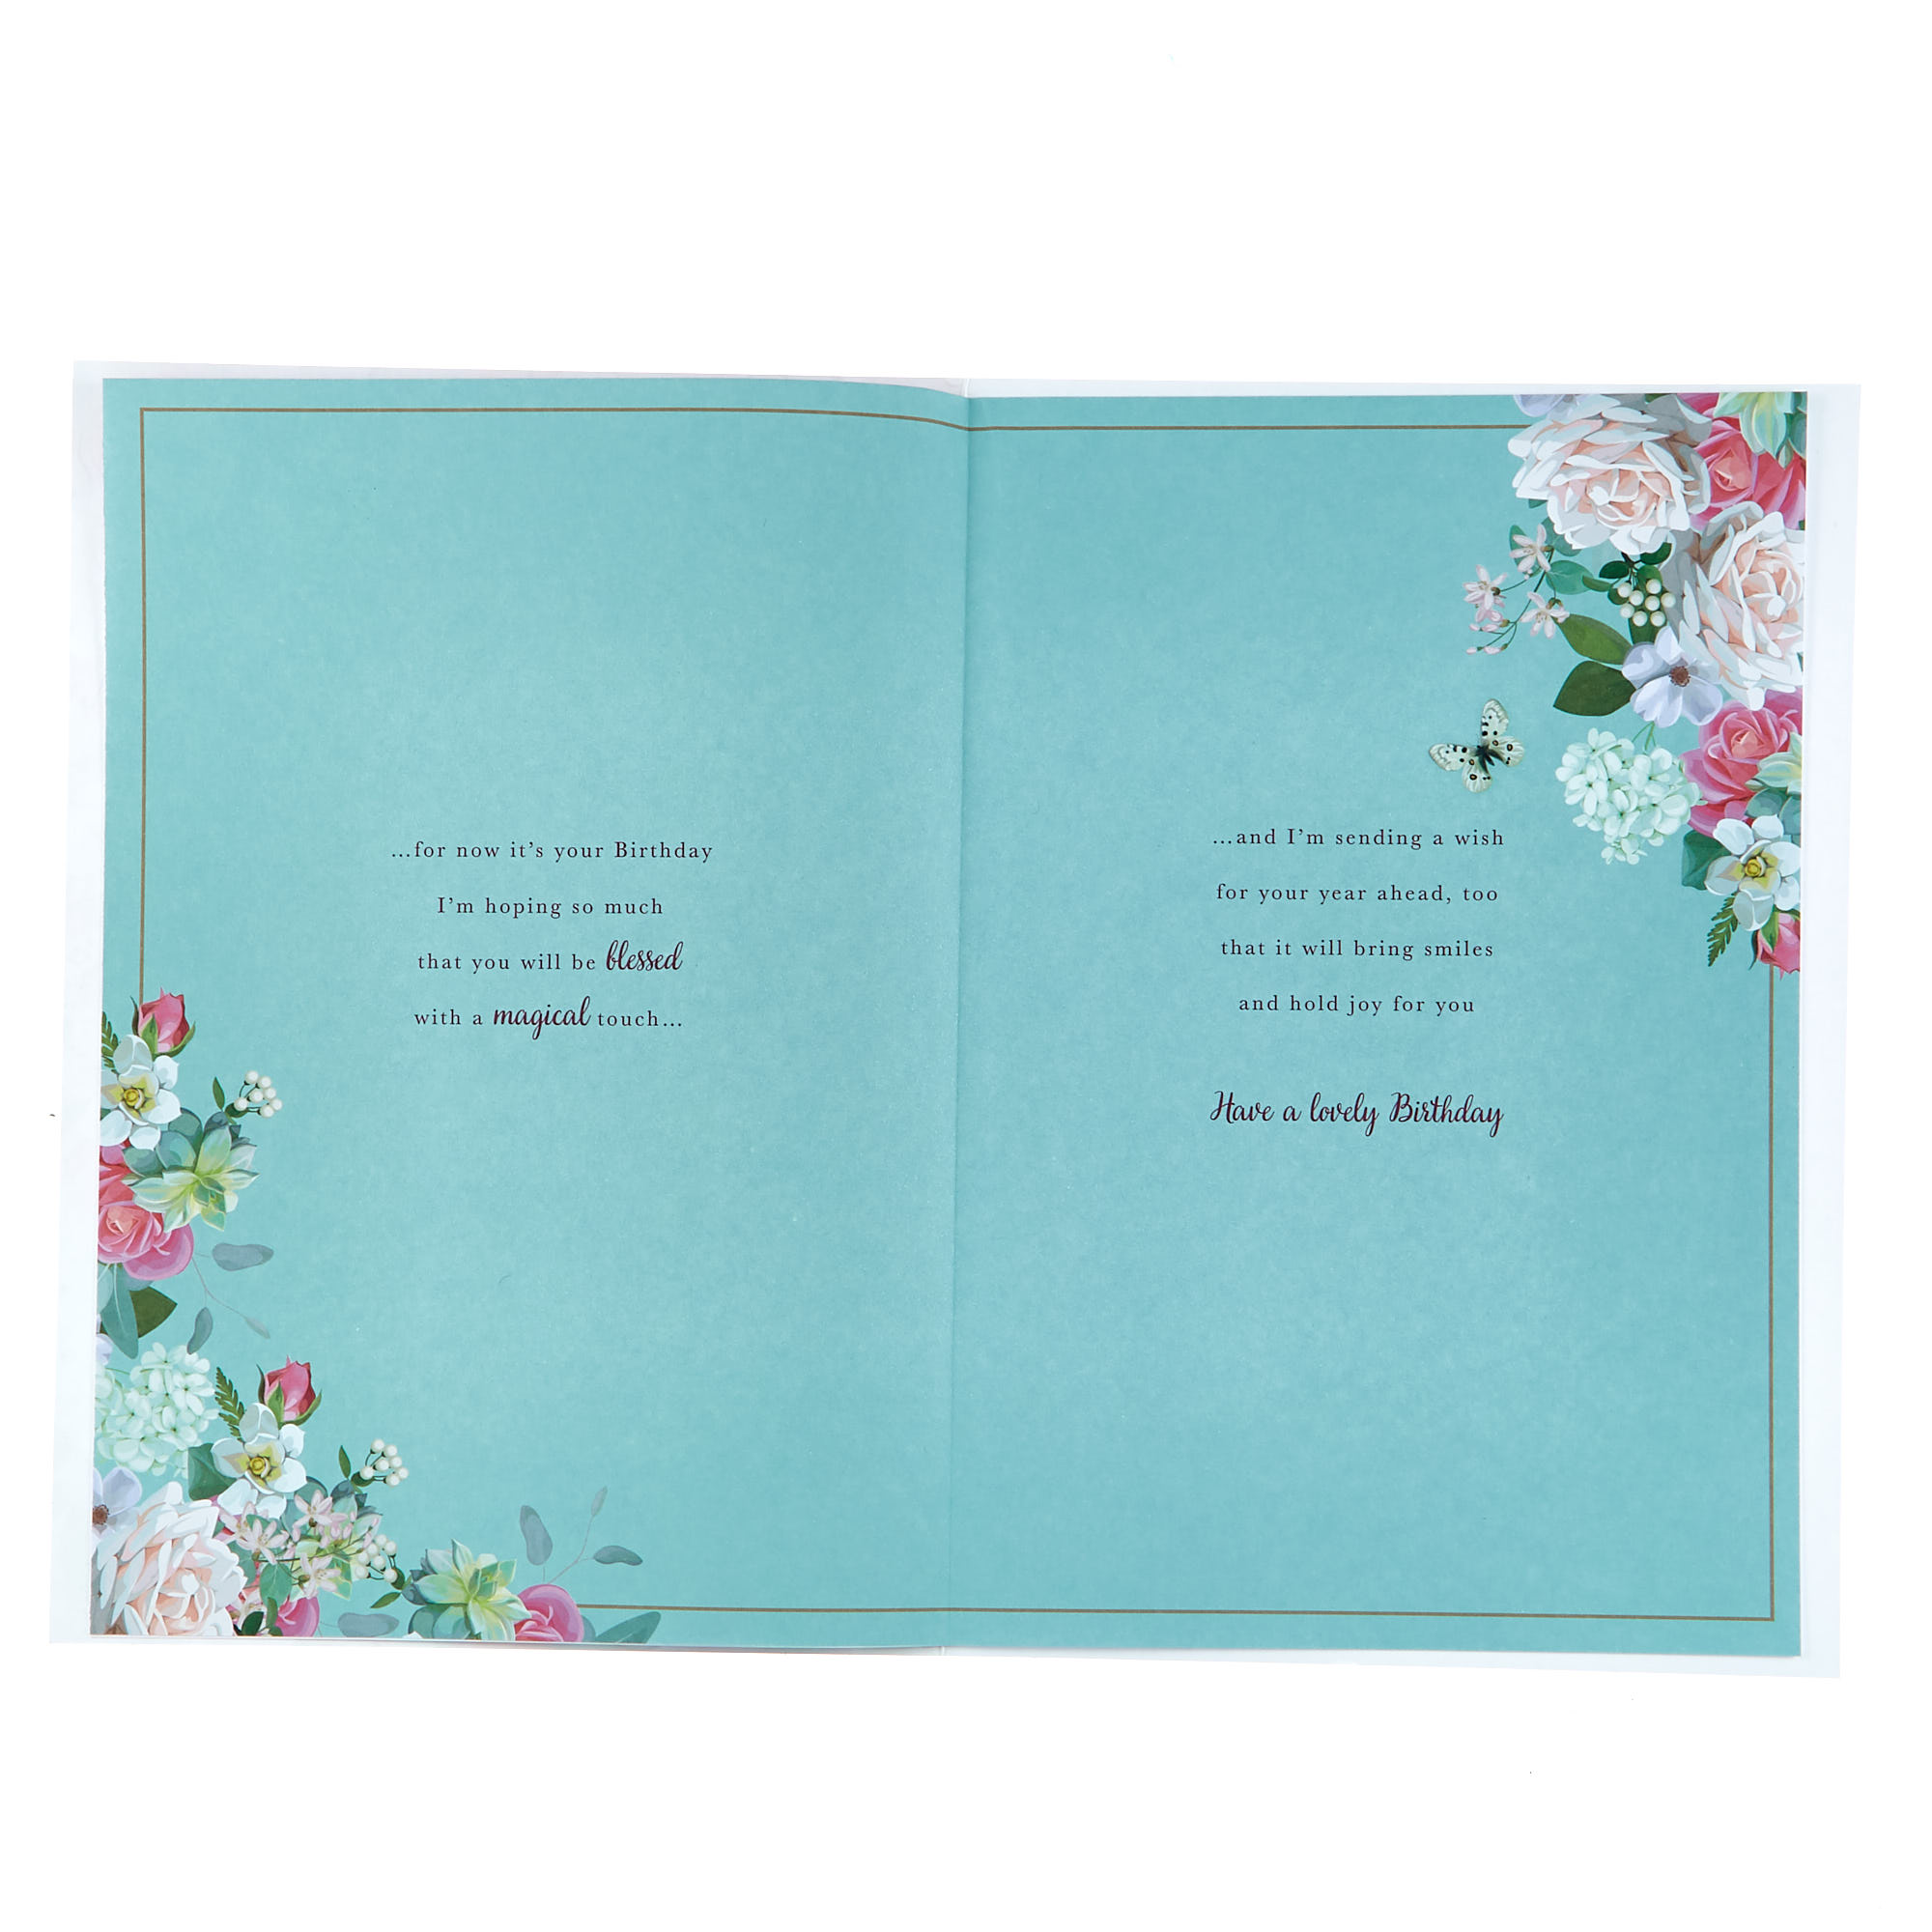 Birthday Card - Sister You're Caring & Loving 